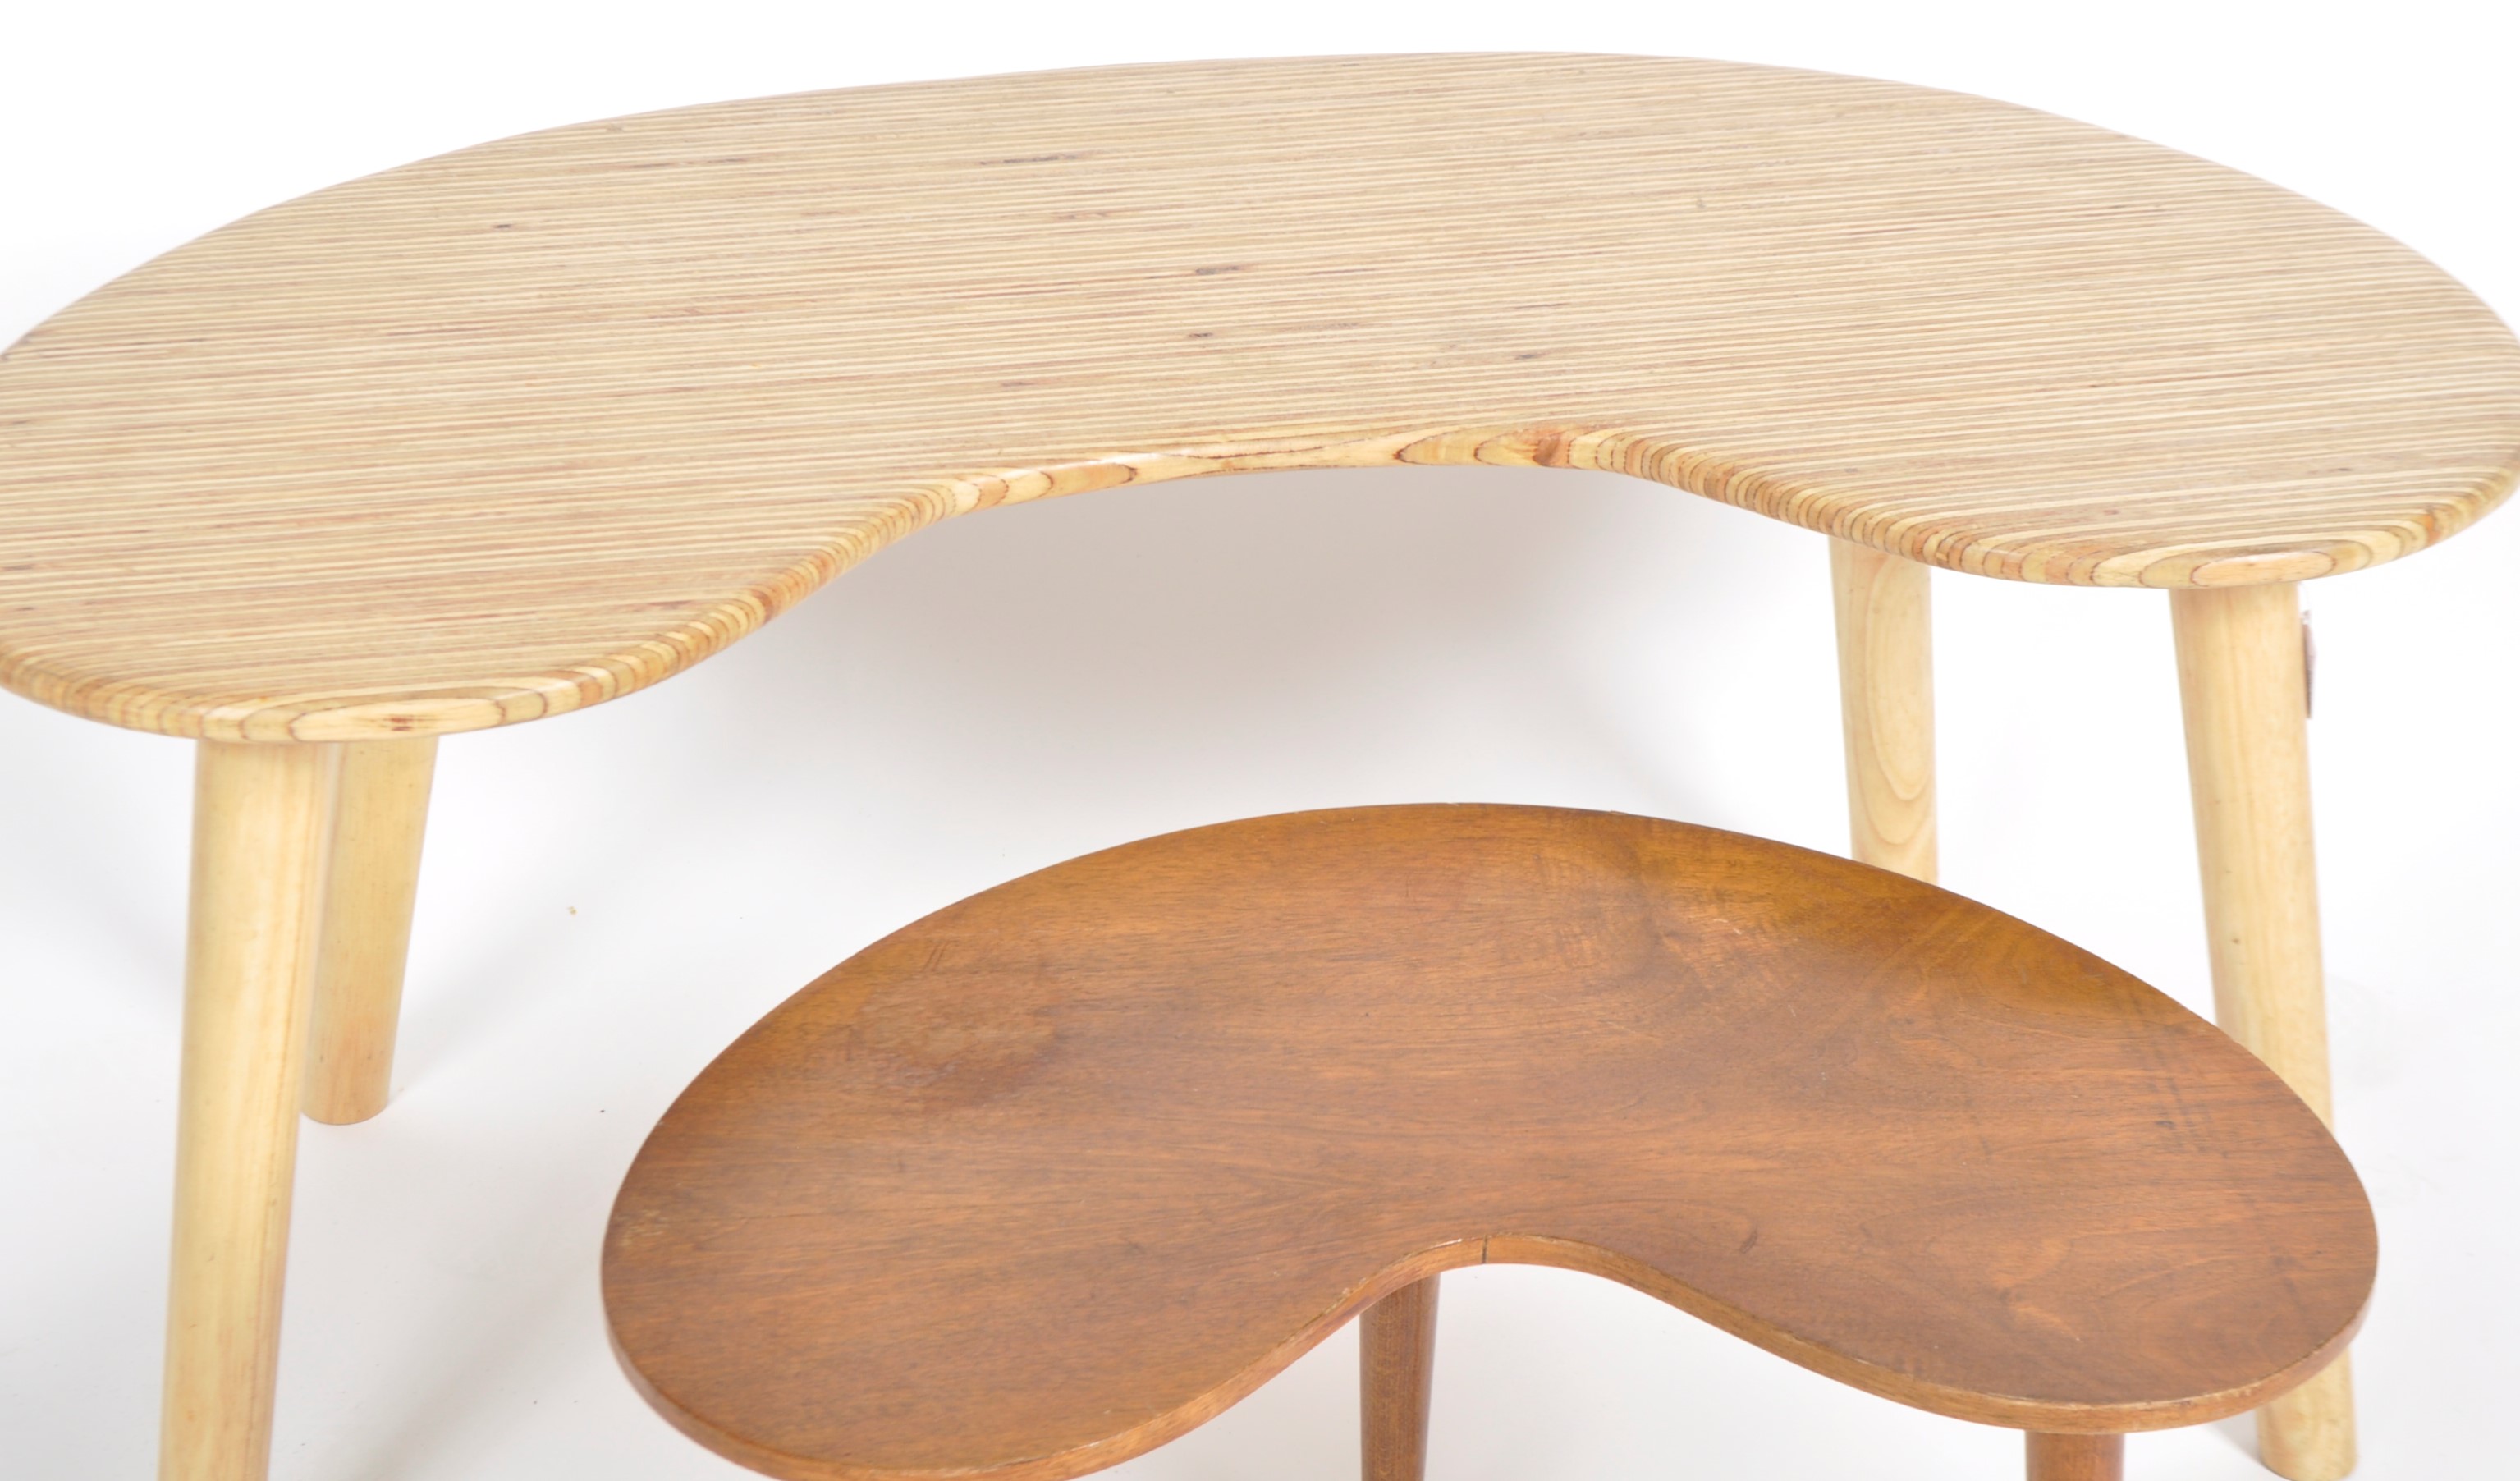 PAIR OF RETRO KIDNEY SHAPED LOW TABLE - Image 3 of 5